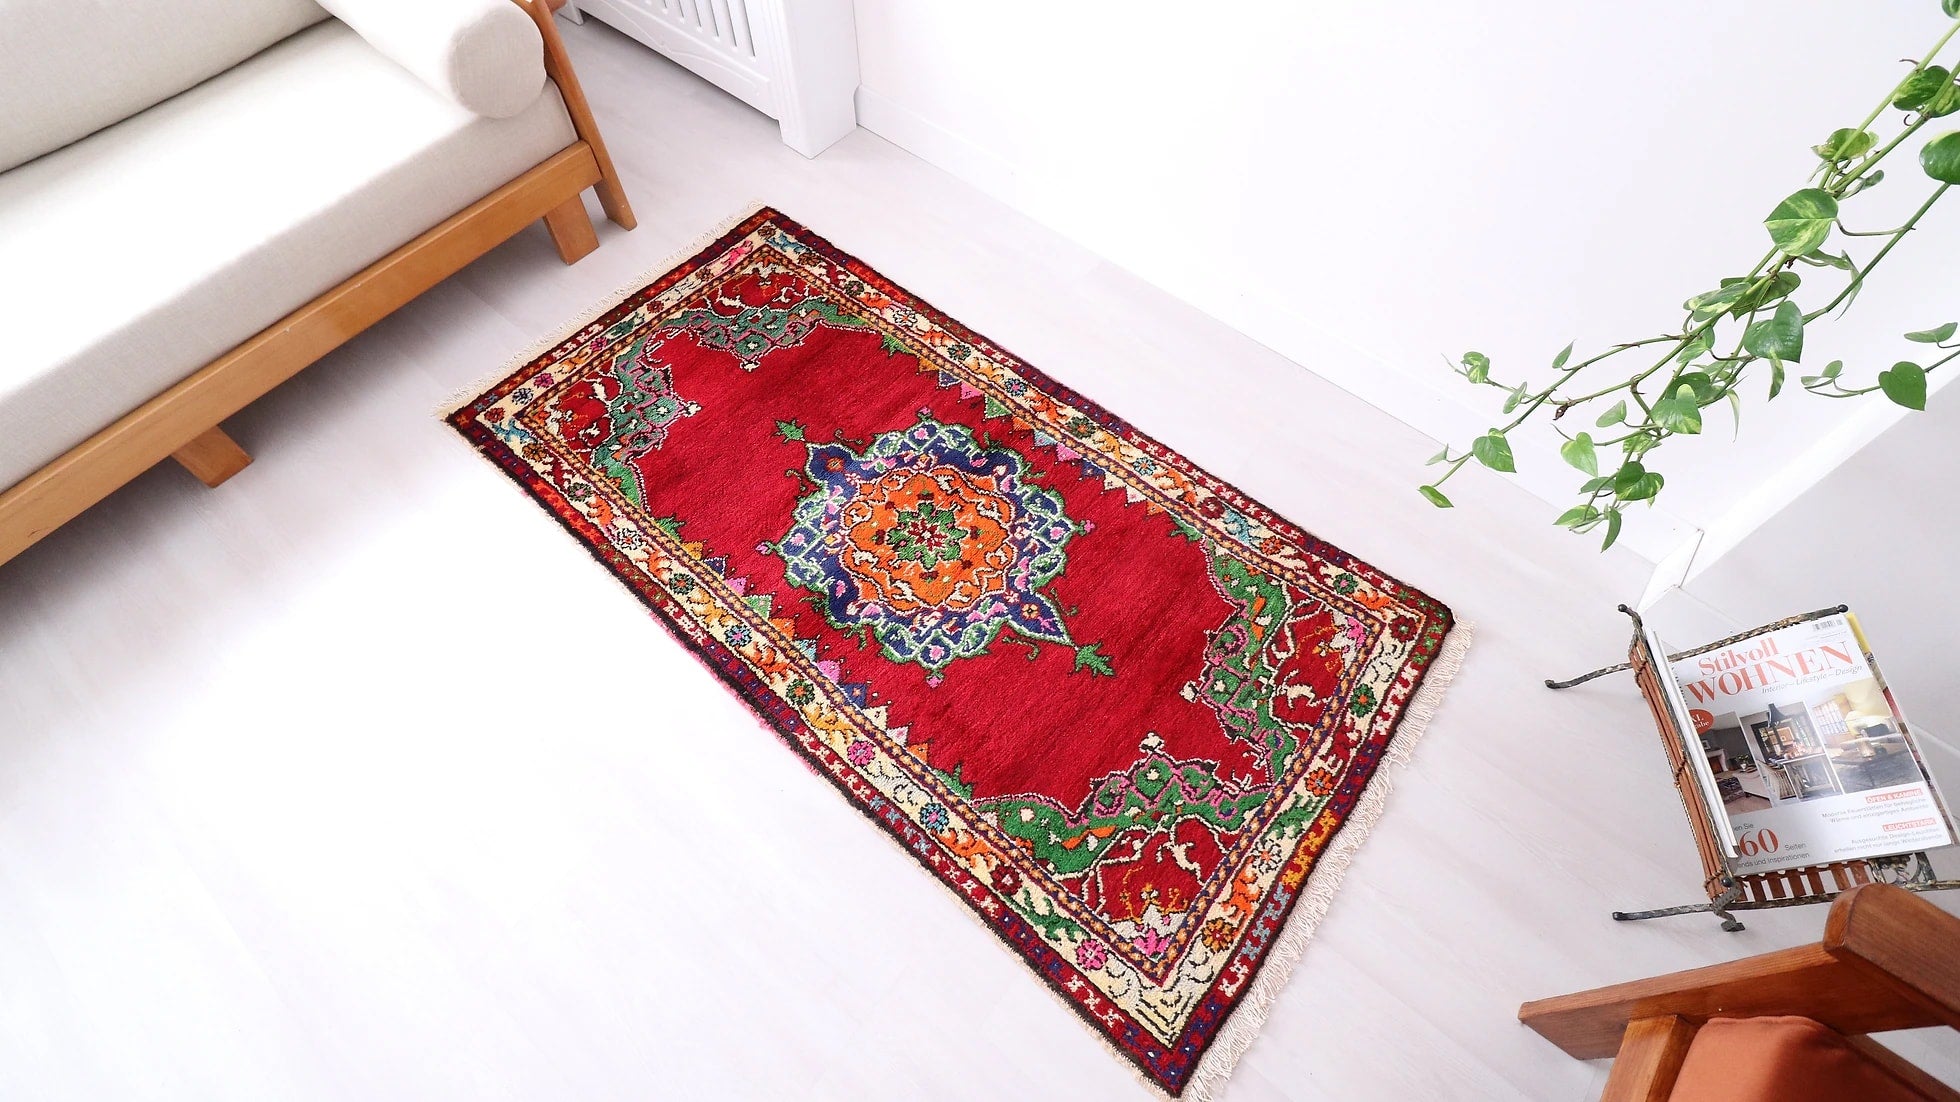 vintage hand-knotted medallion oriental rug in red from the 1960s era